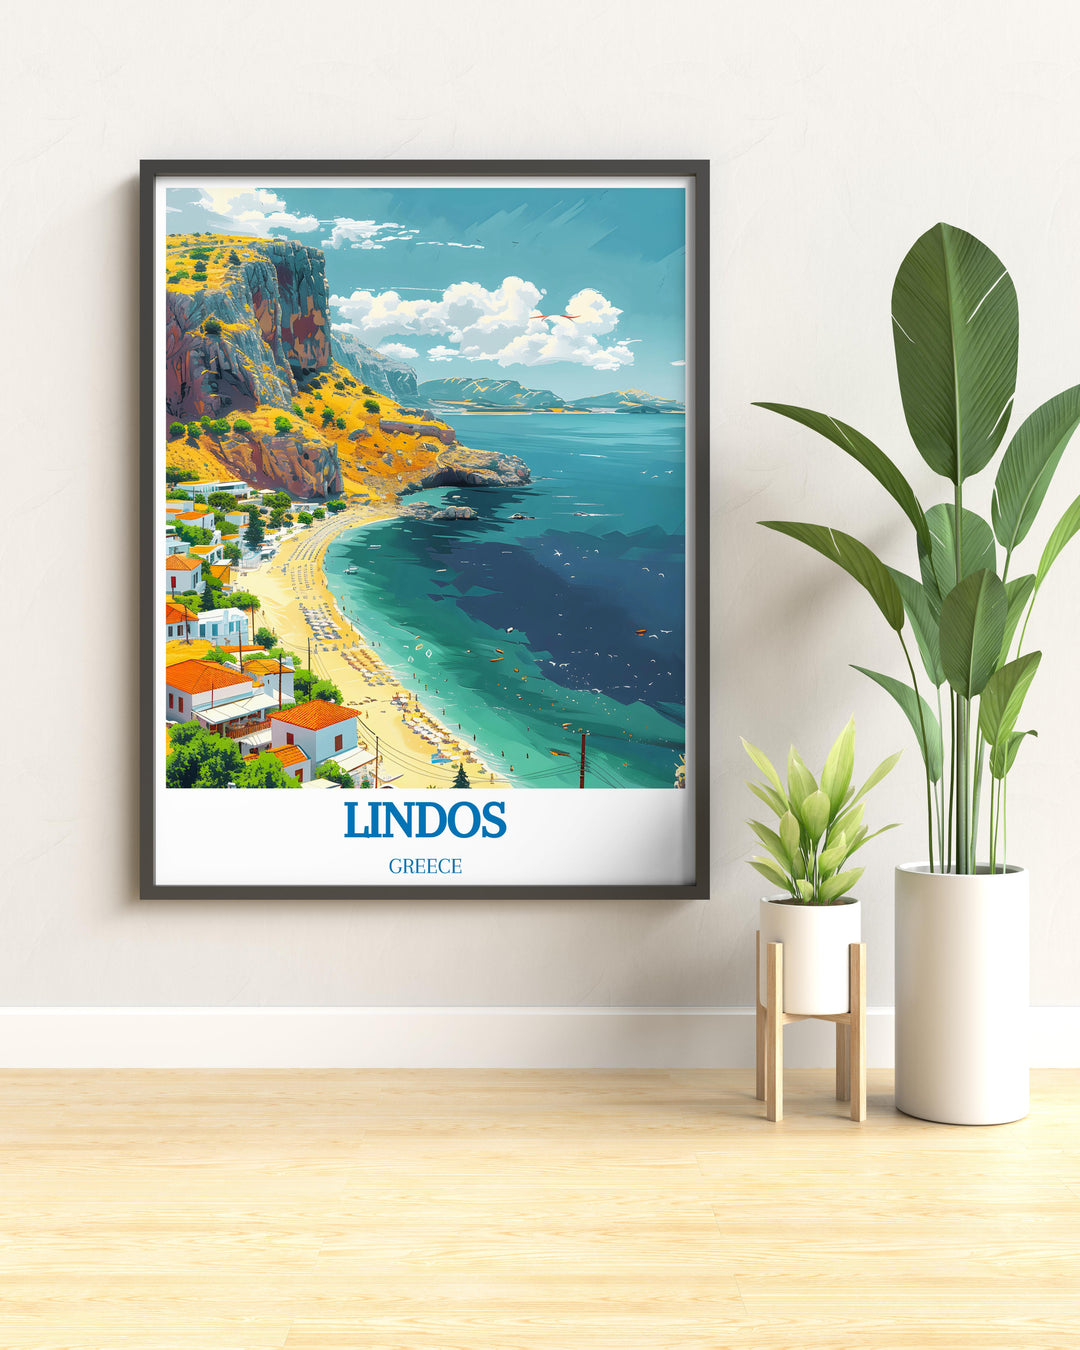 Vibrant travel poster of Greece, highlighting Lindos as a key destination, perfect for inspiring future travels.